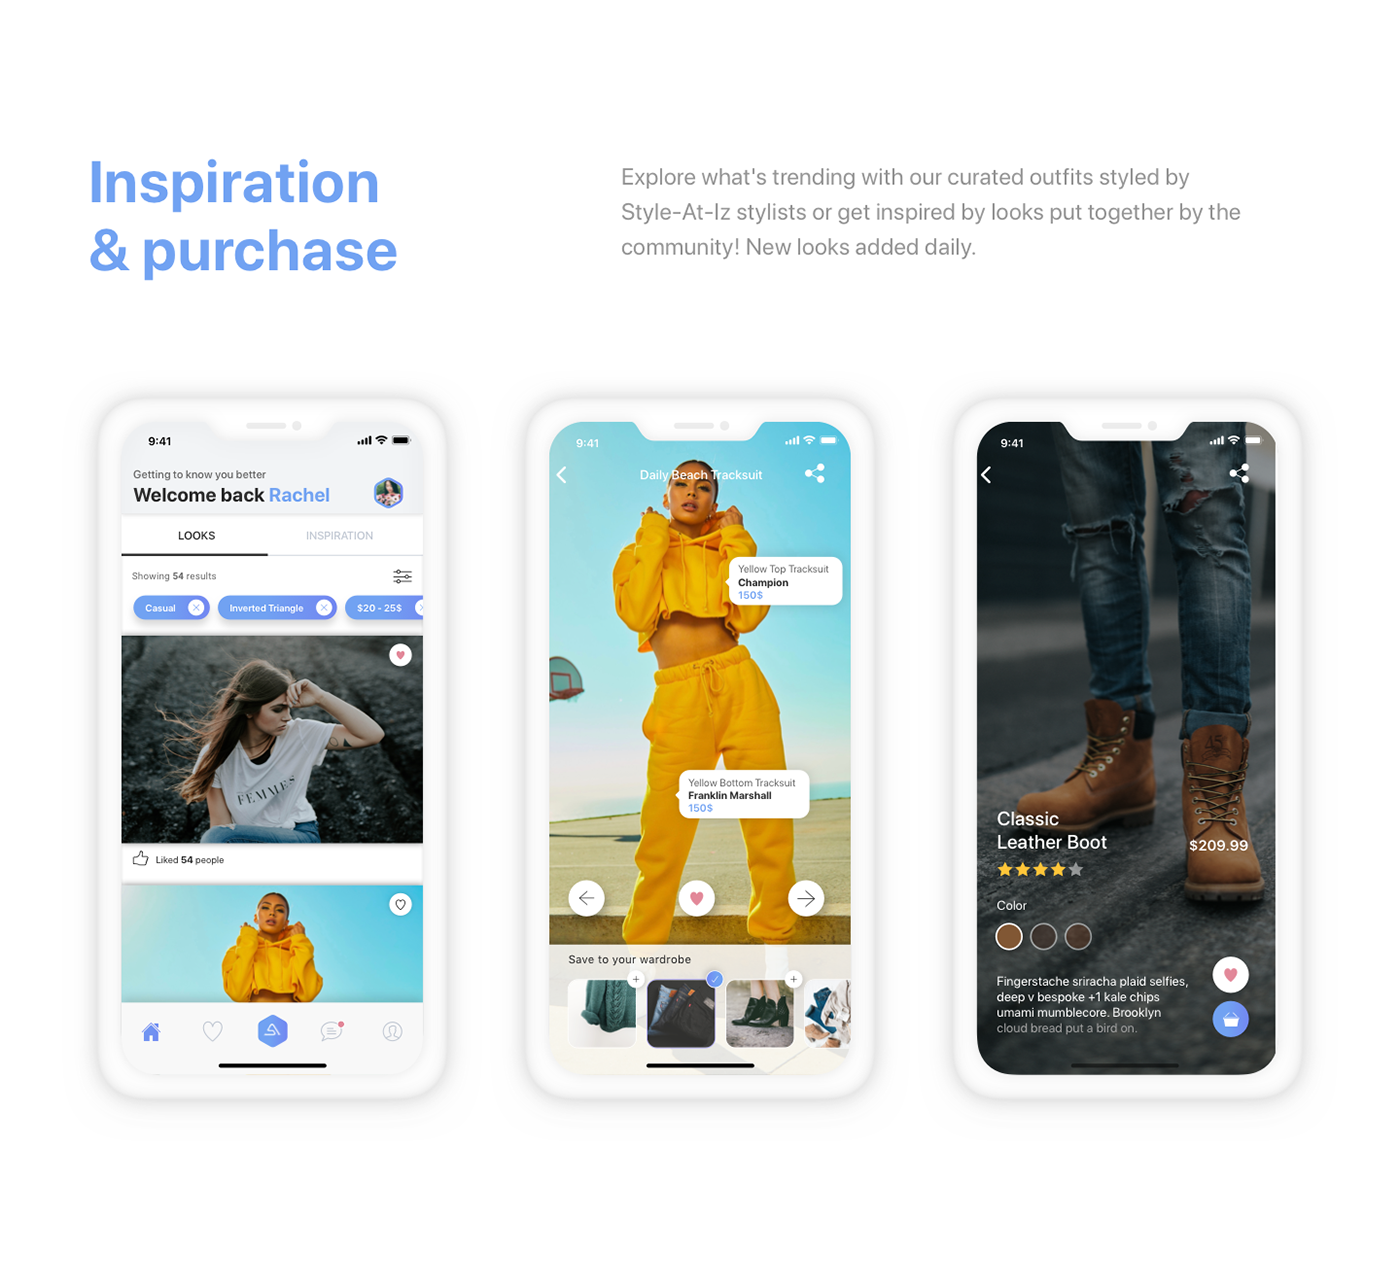 Fashion  app ux UI design user experience wireframes artificial intelligence machine learning ASSISTANT